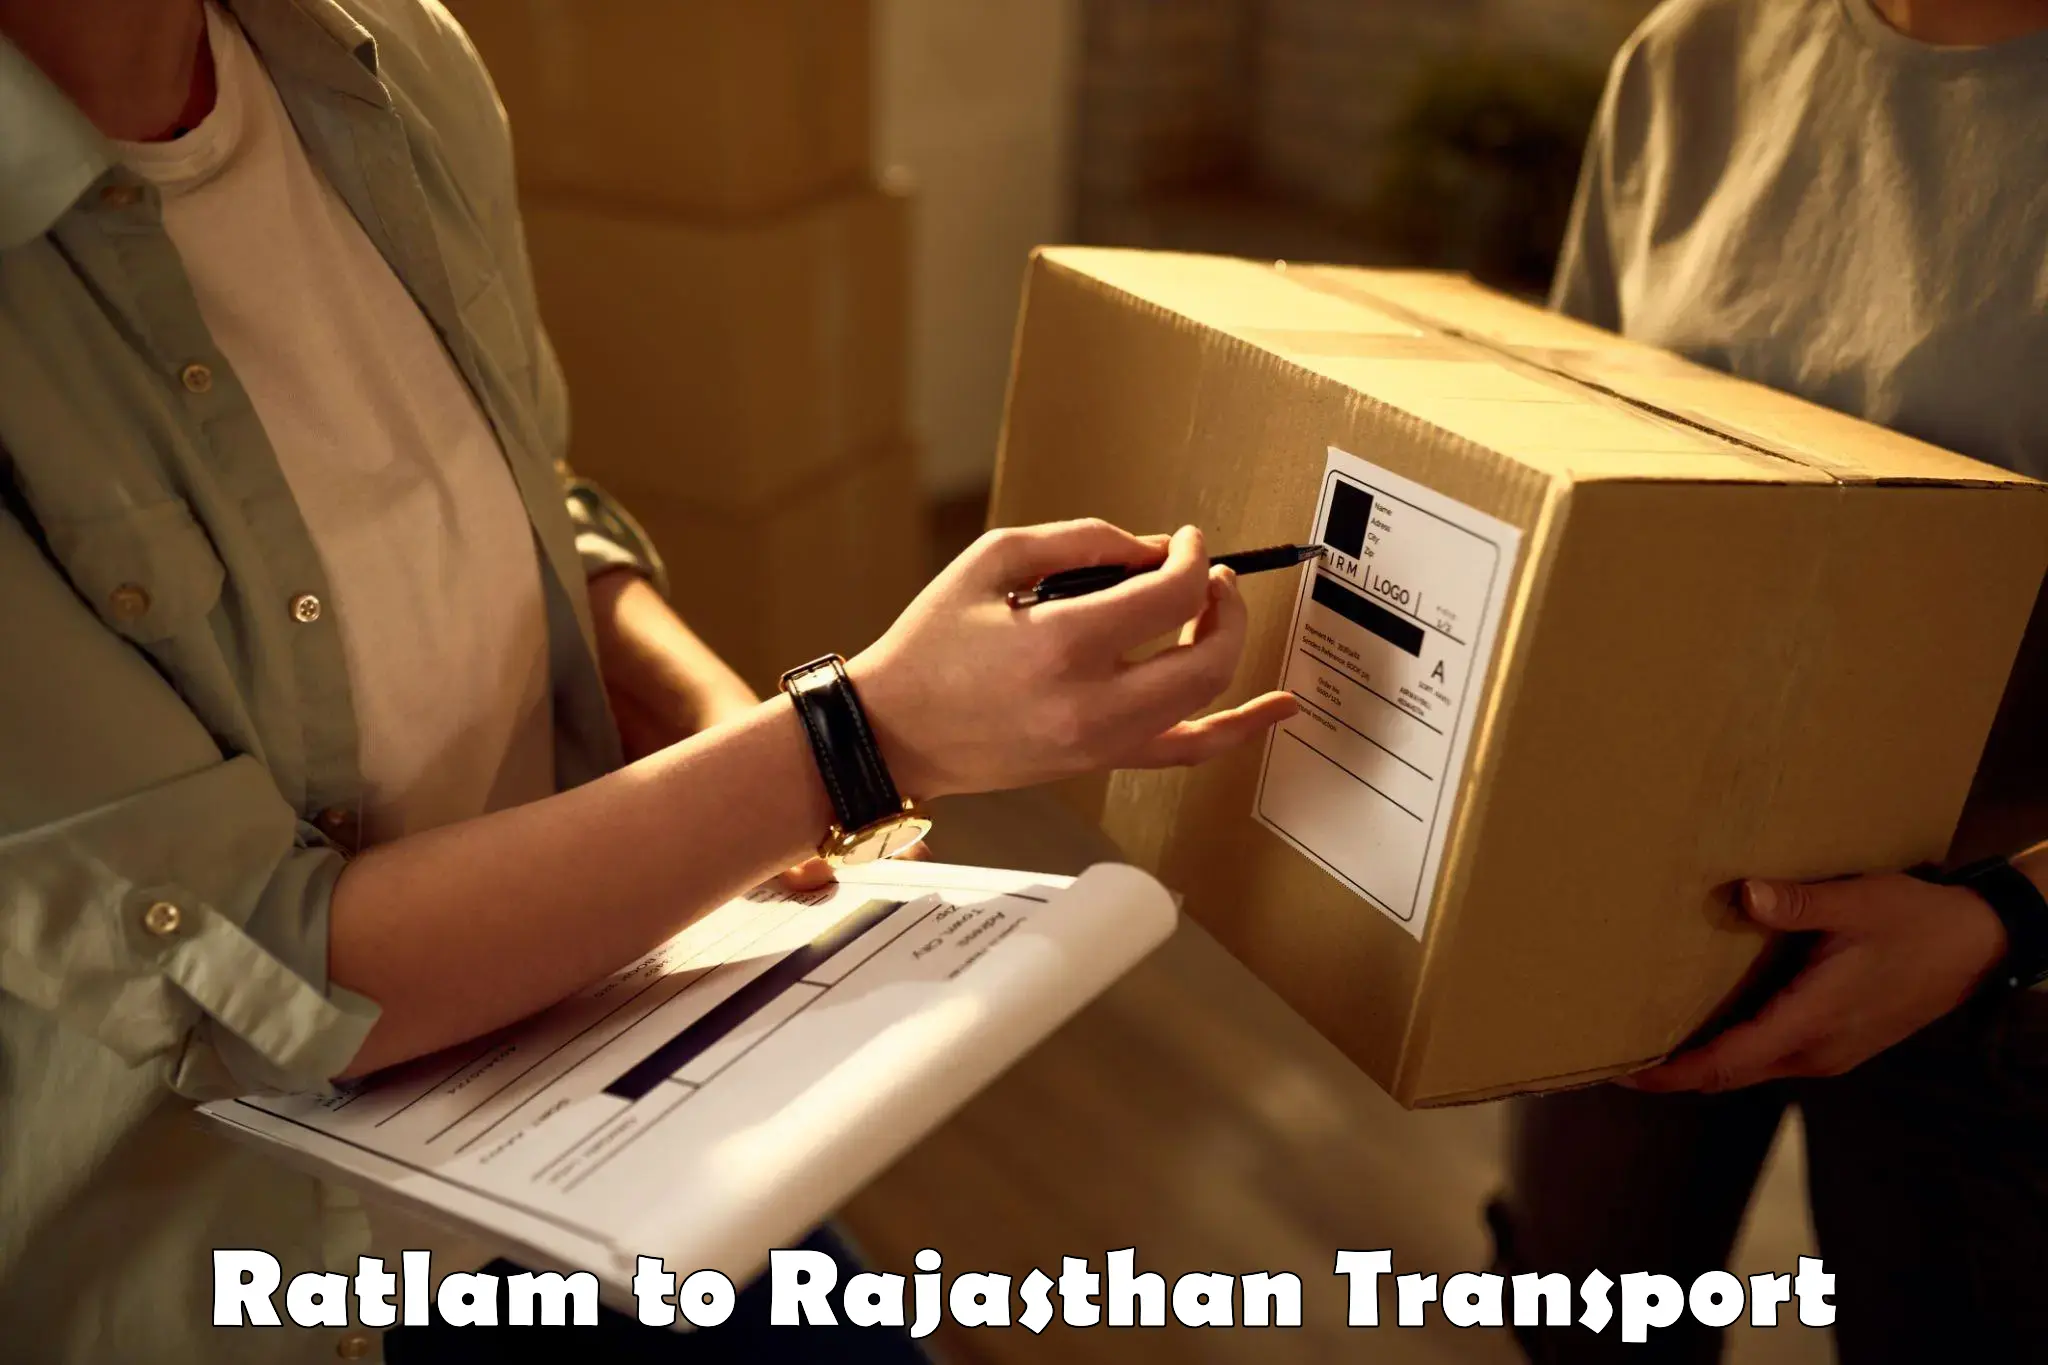 Nationwide transport services Ratlam to Fatehpur Sikar